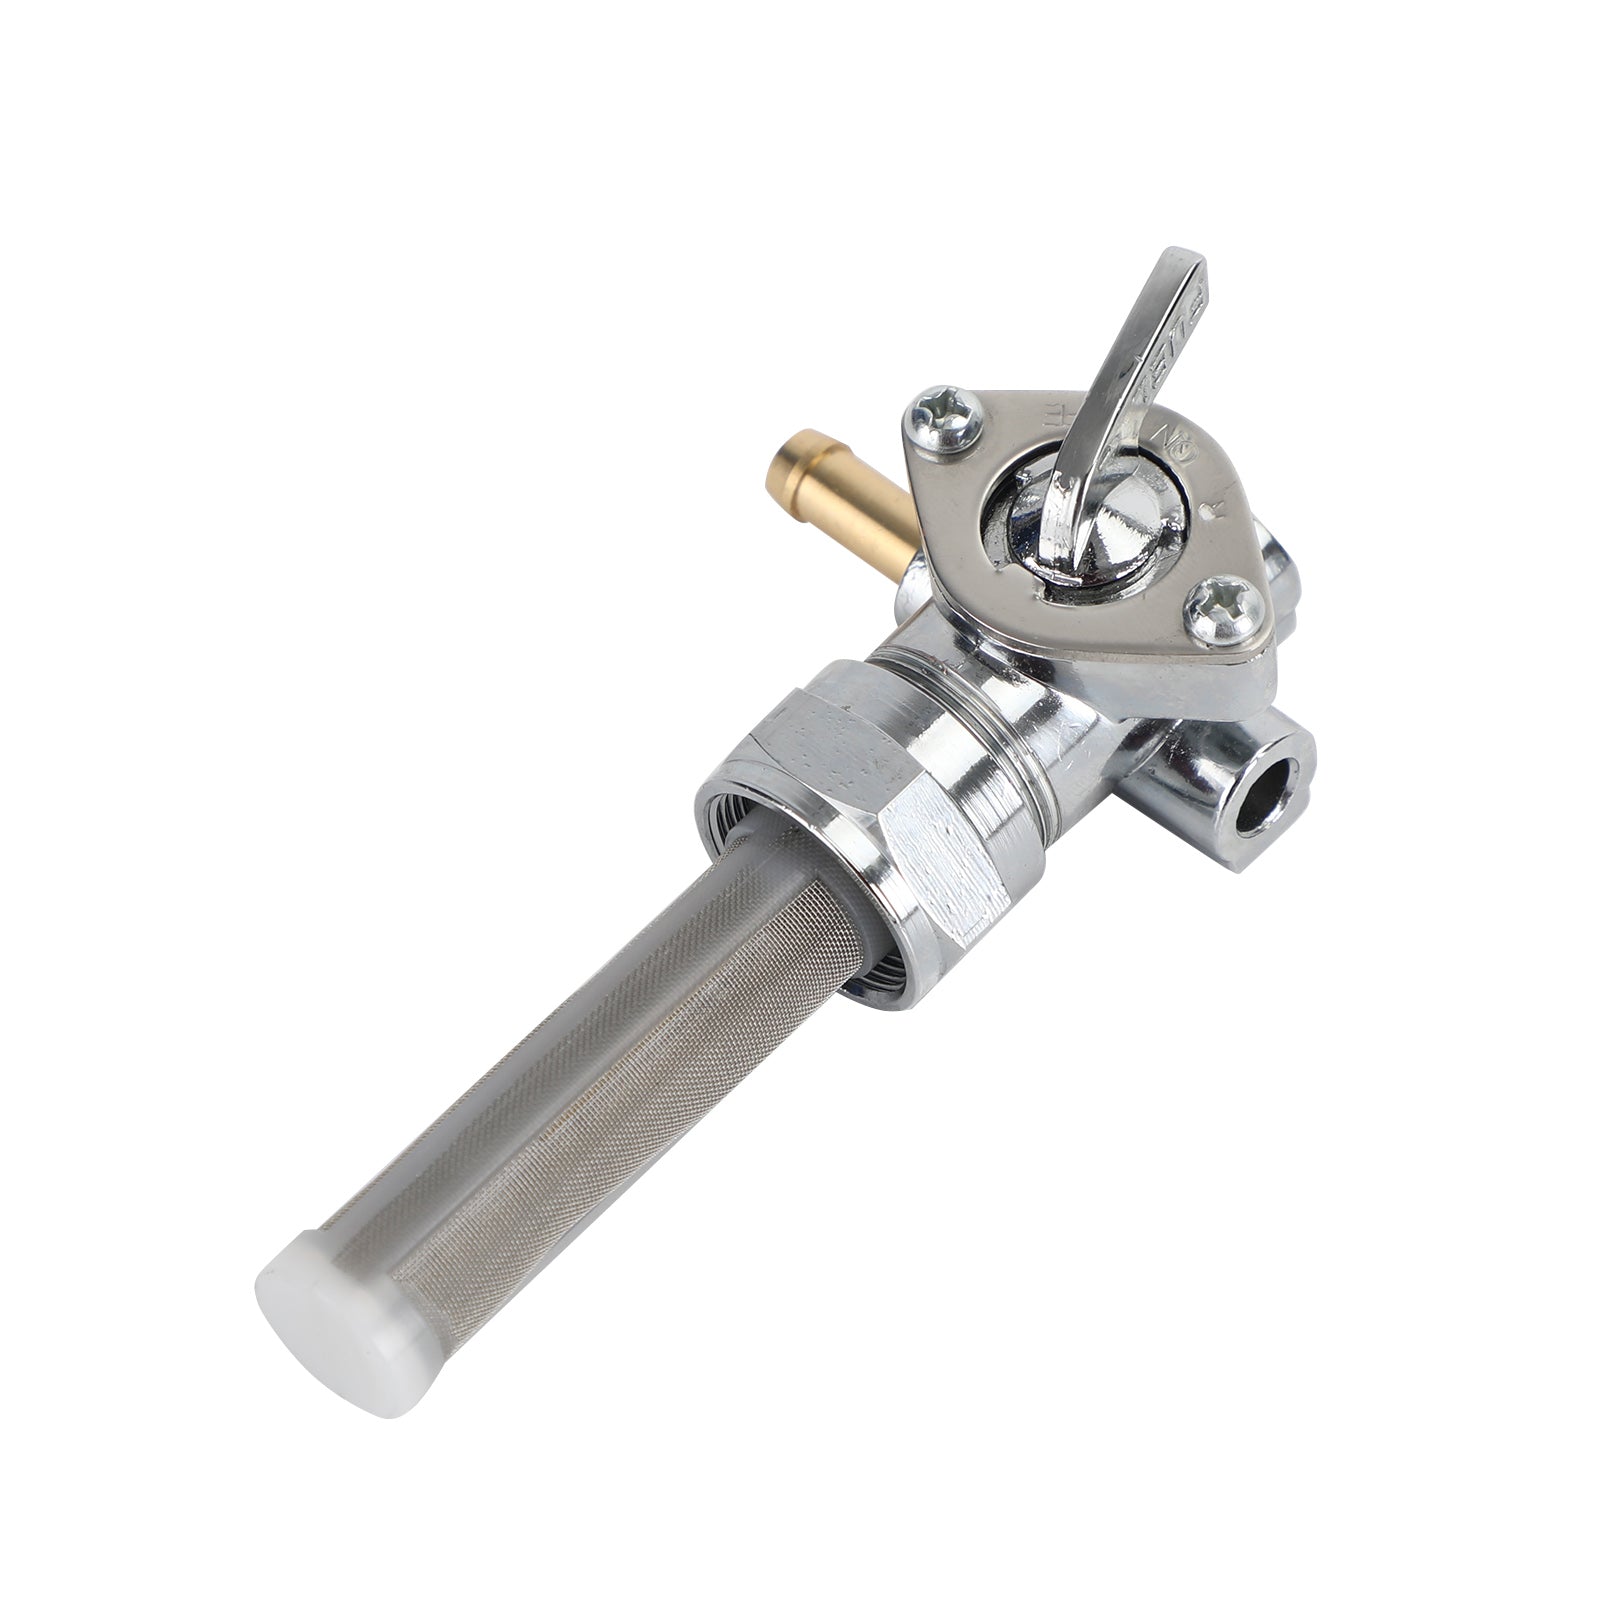 Petcock Fuel Valve Right Spigot 22mm fit for Softail Electra Glide Road King Generic